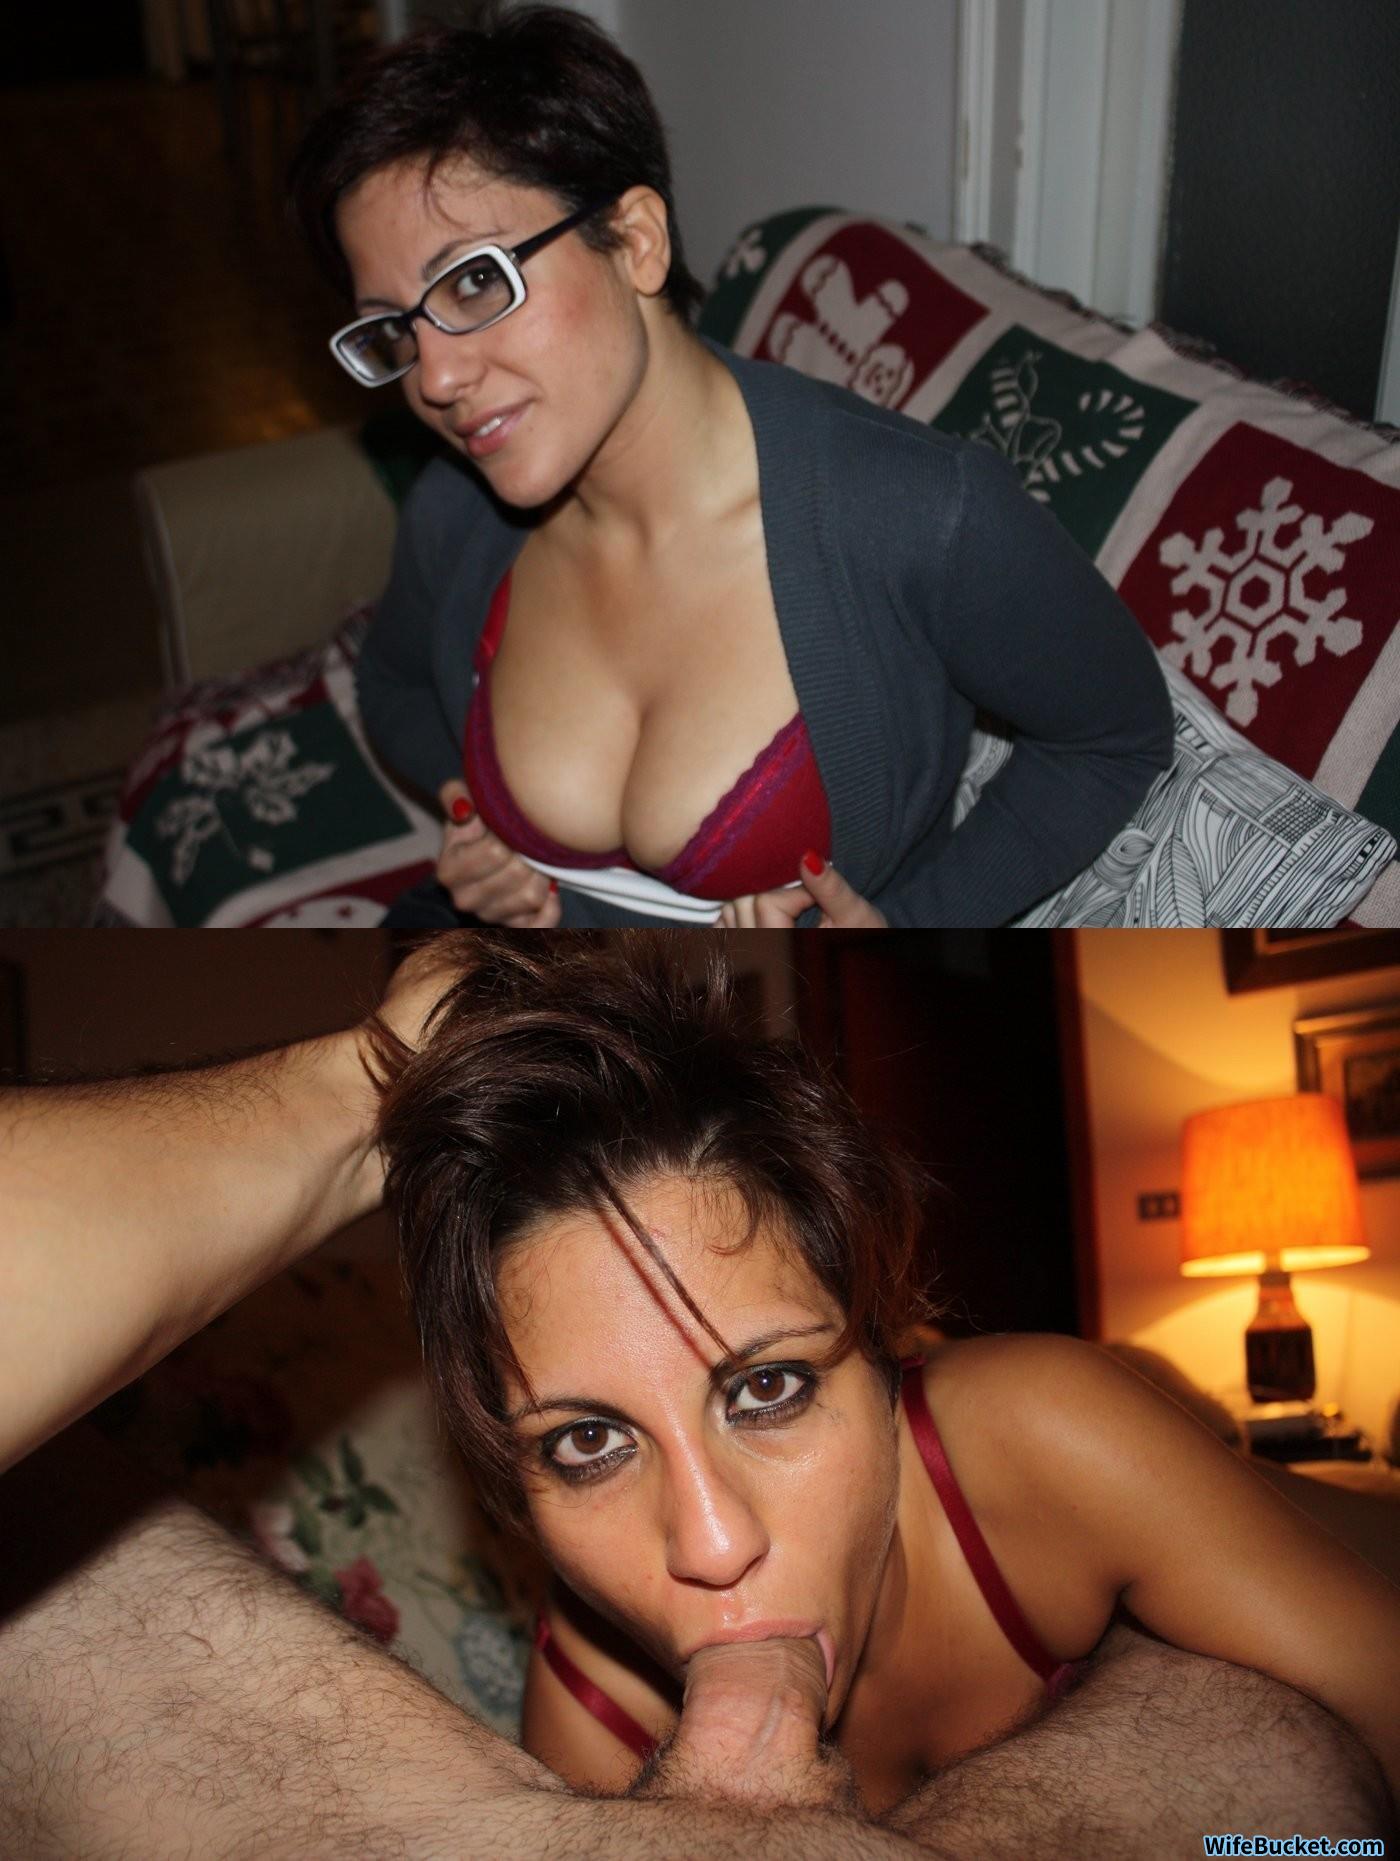 Cool before-after sex pics from the archive